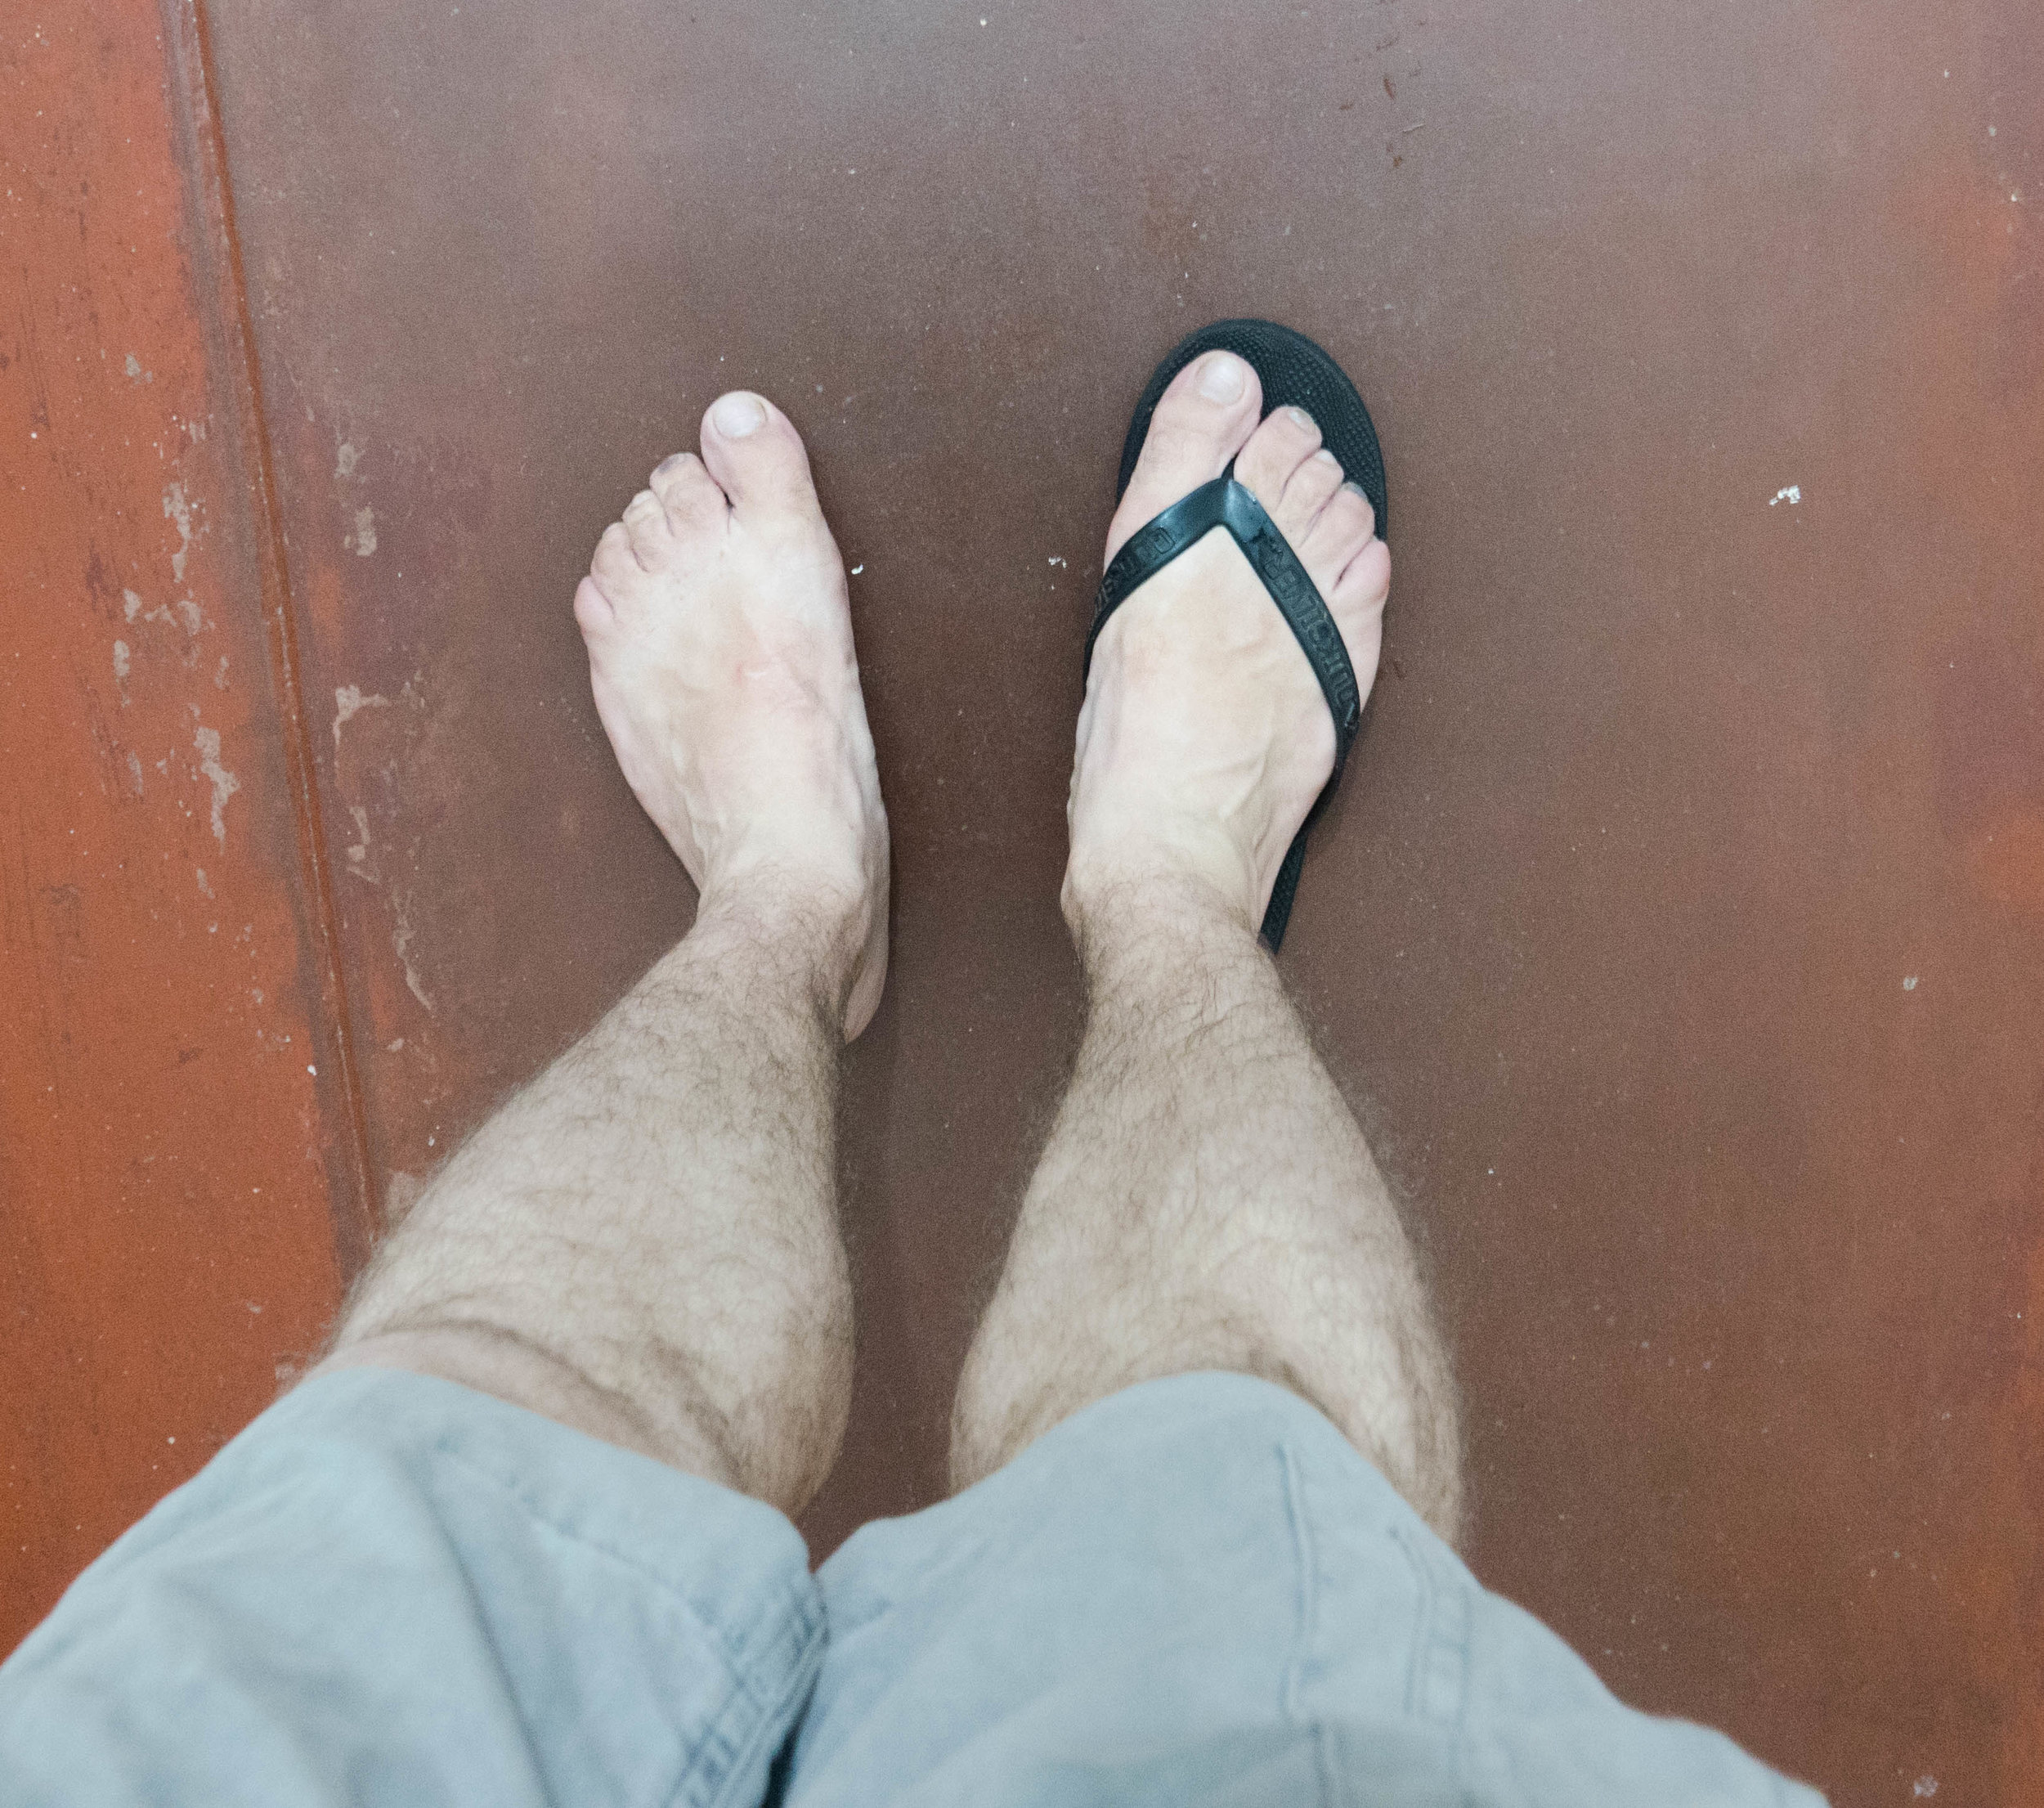 Norbert of eRunCoach.com shows his feet before wearing Correct